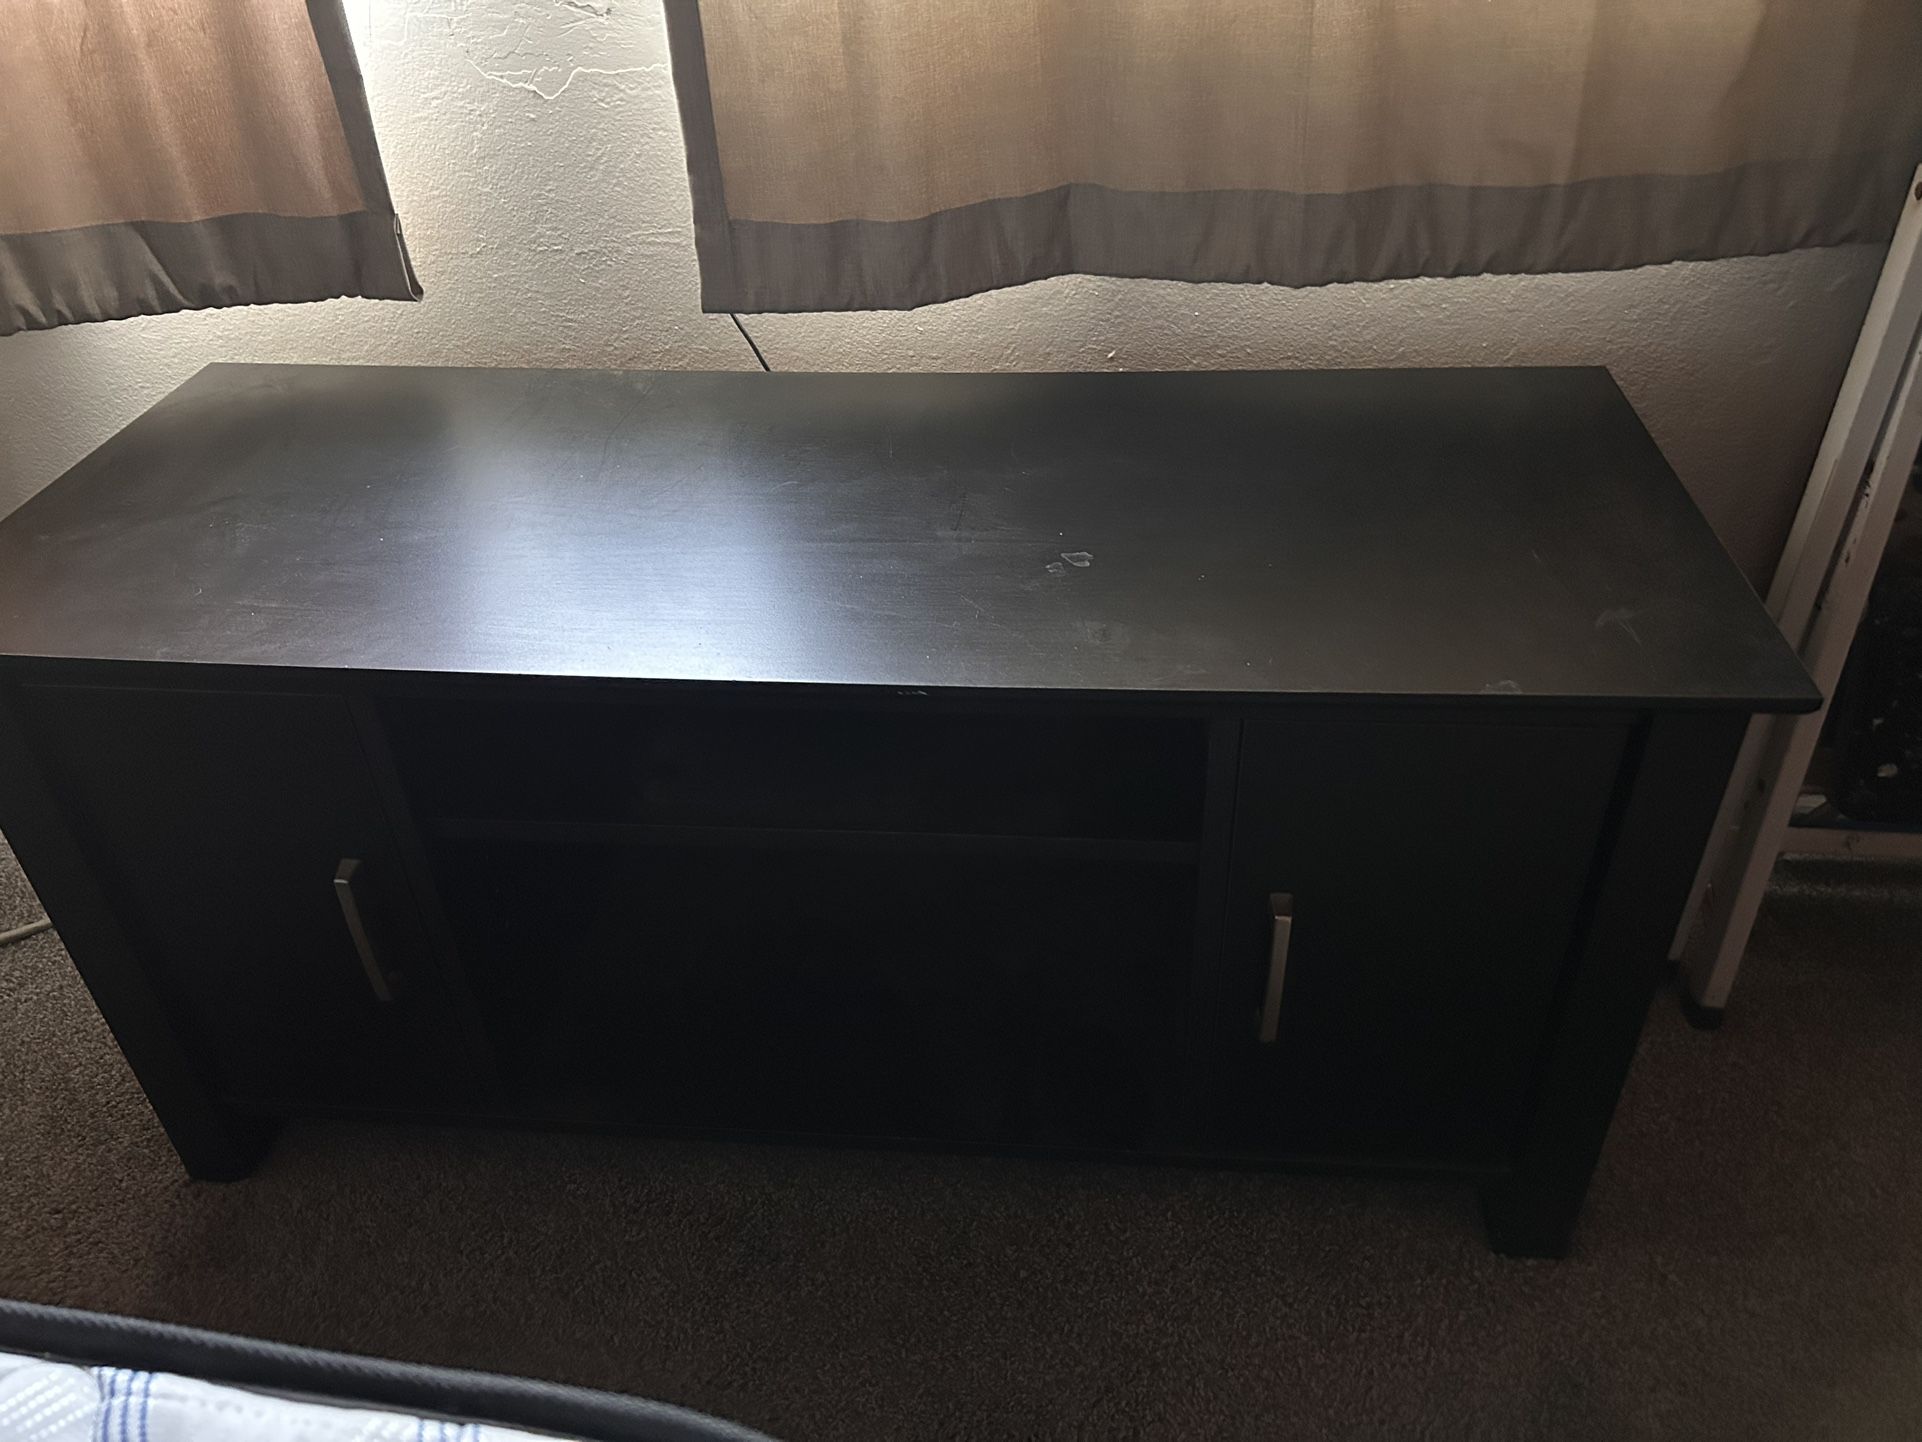 Free Tv Stand